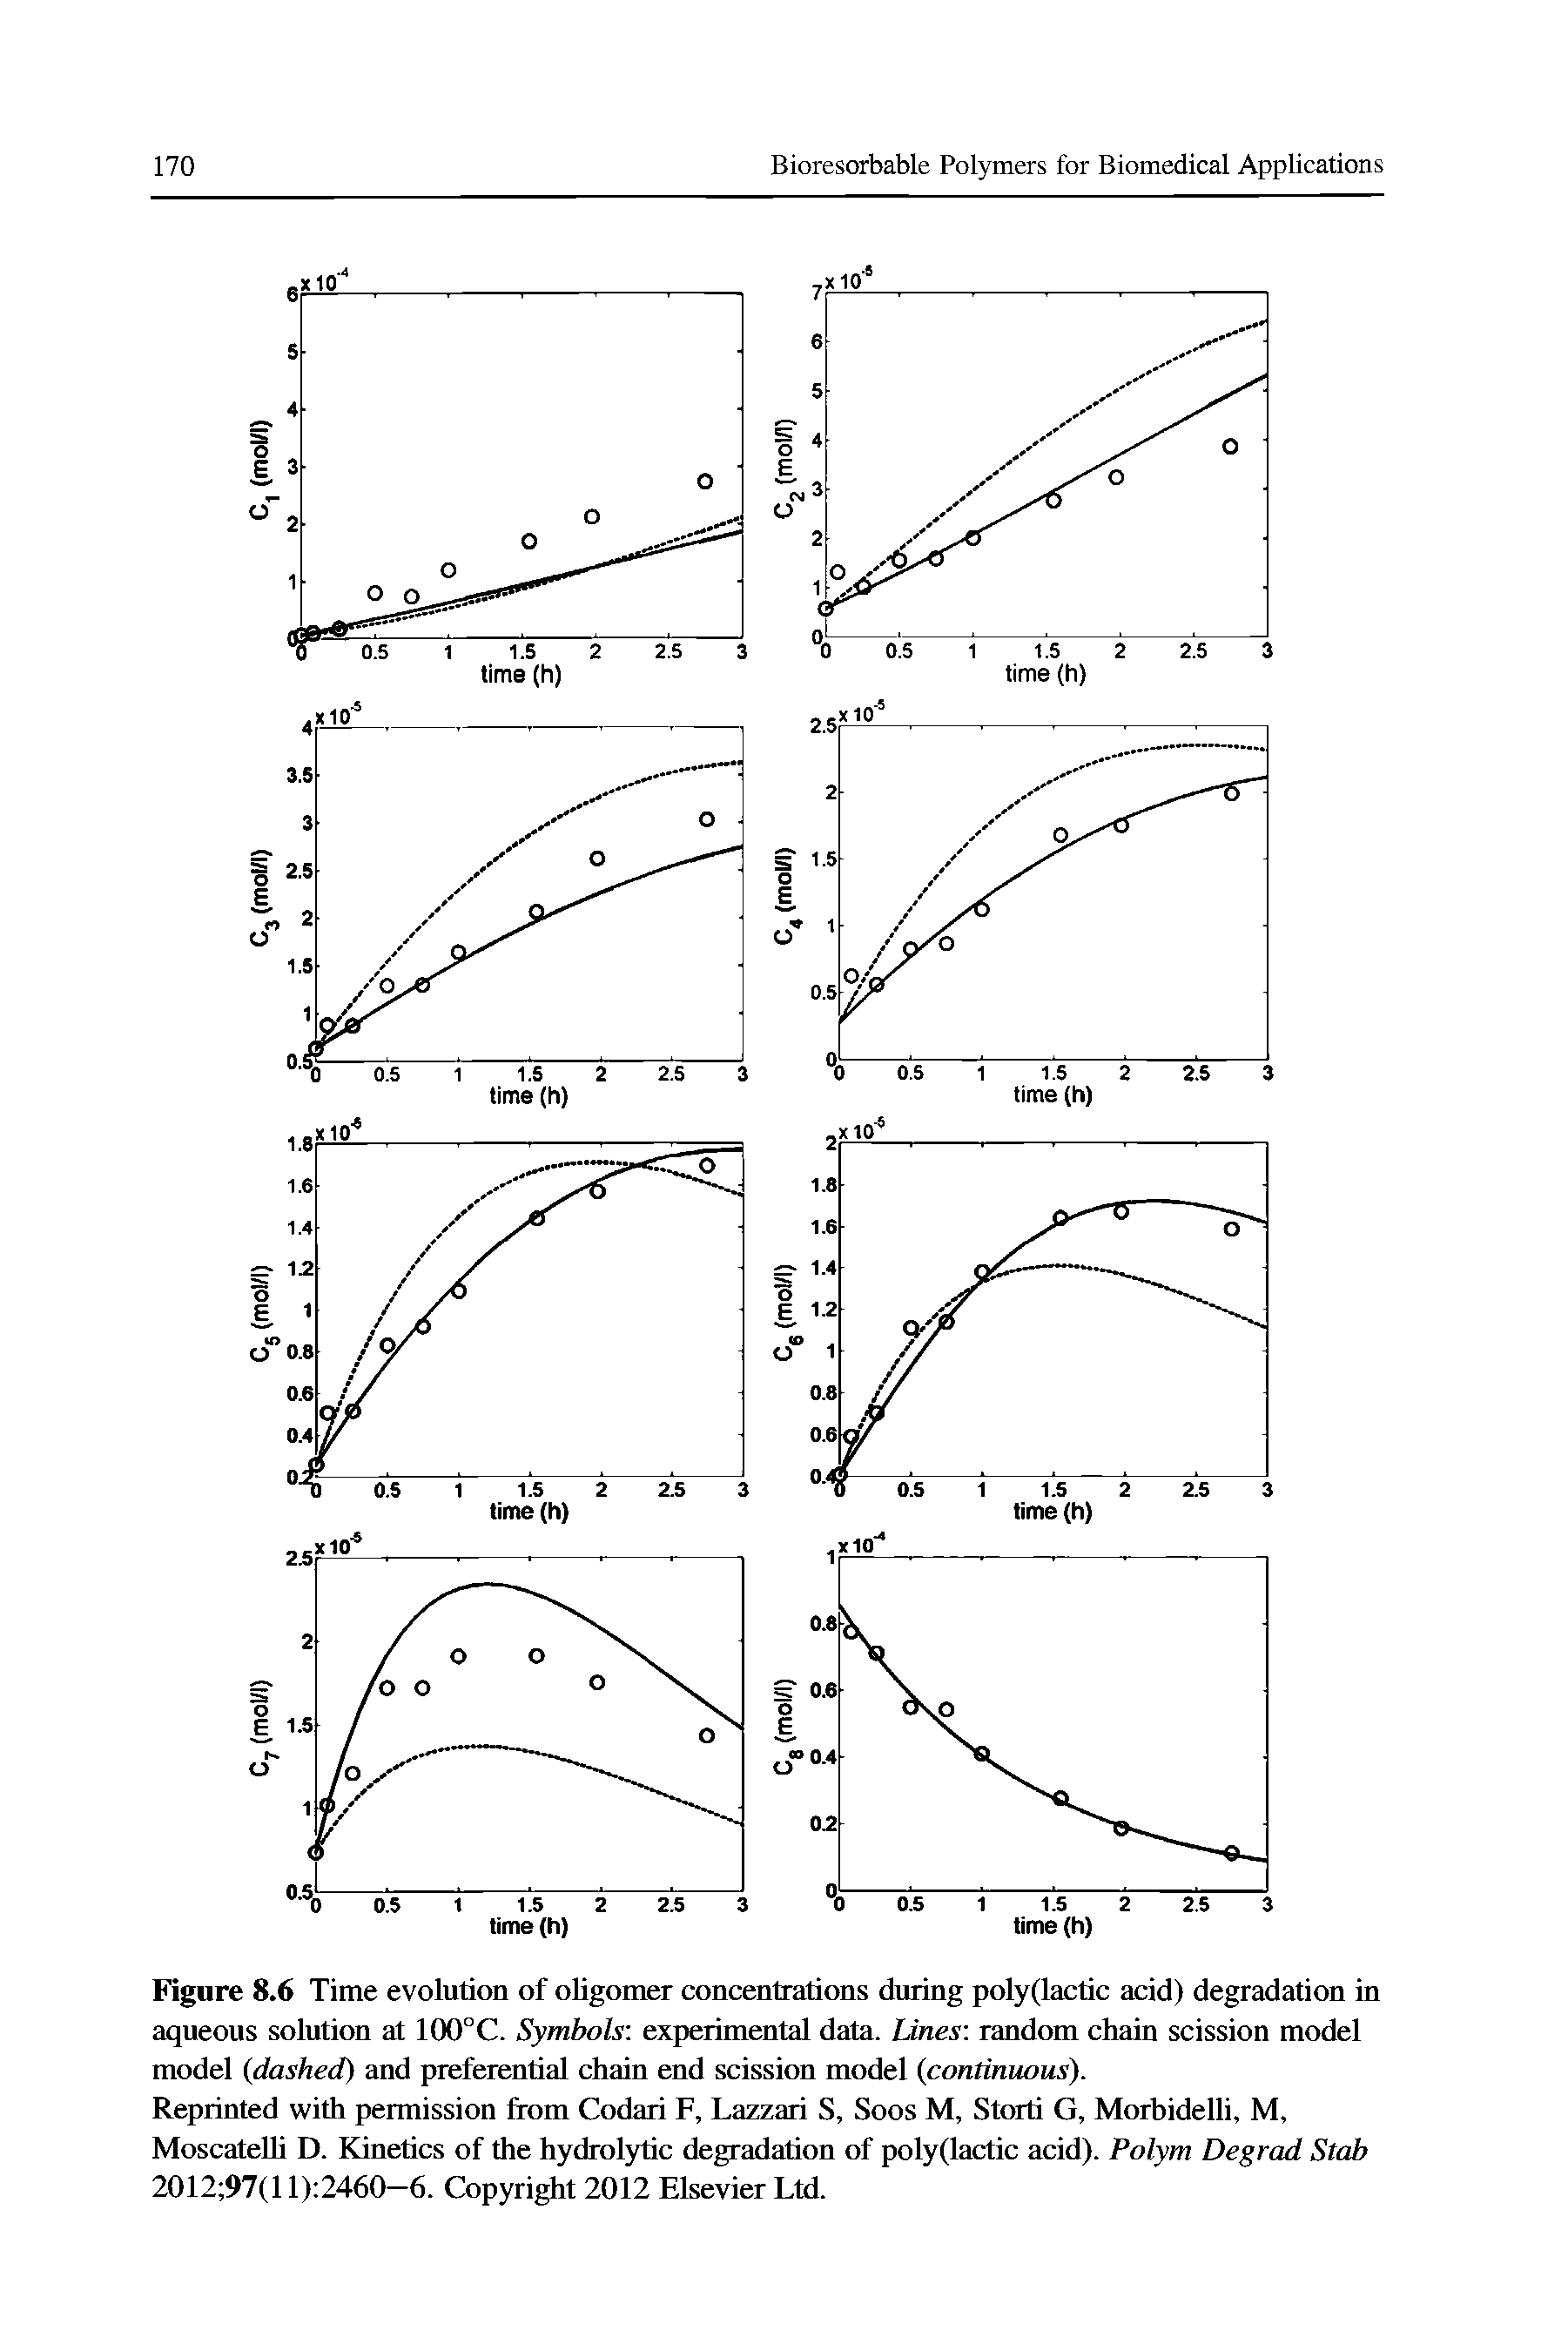 Figure 8.6 Time evolution of oligomer concentrations during poly(lactic acid) degradation in aqueous solution at 100°C. Symbols experimental data. Lines random chain scission model model dashed) and preferential chain end scission model continuous).